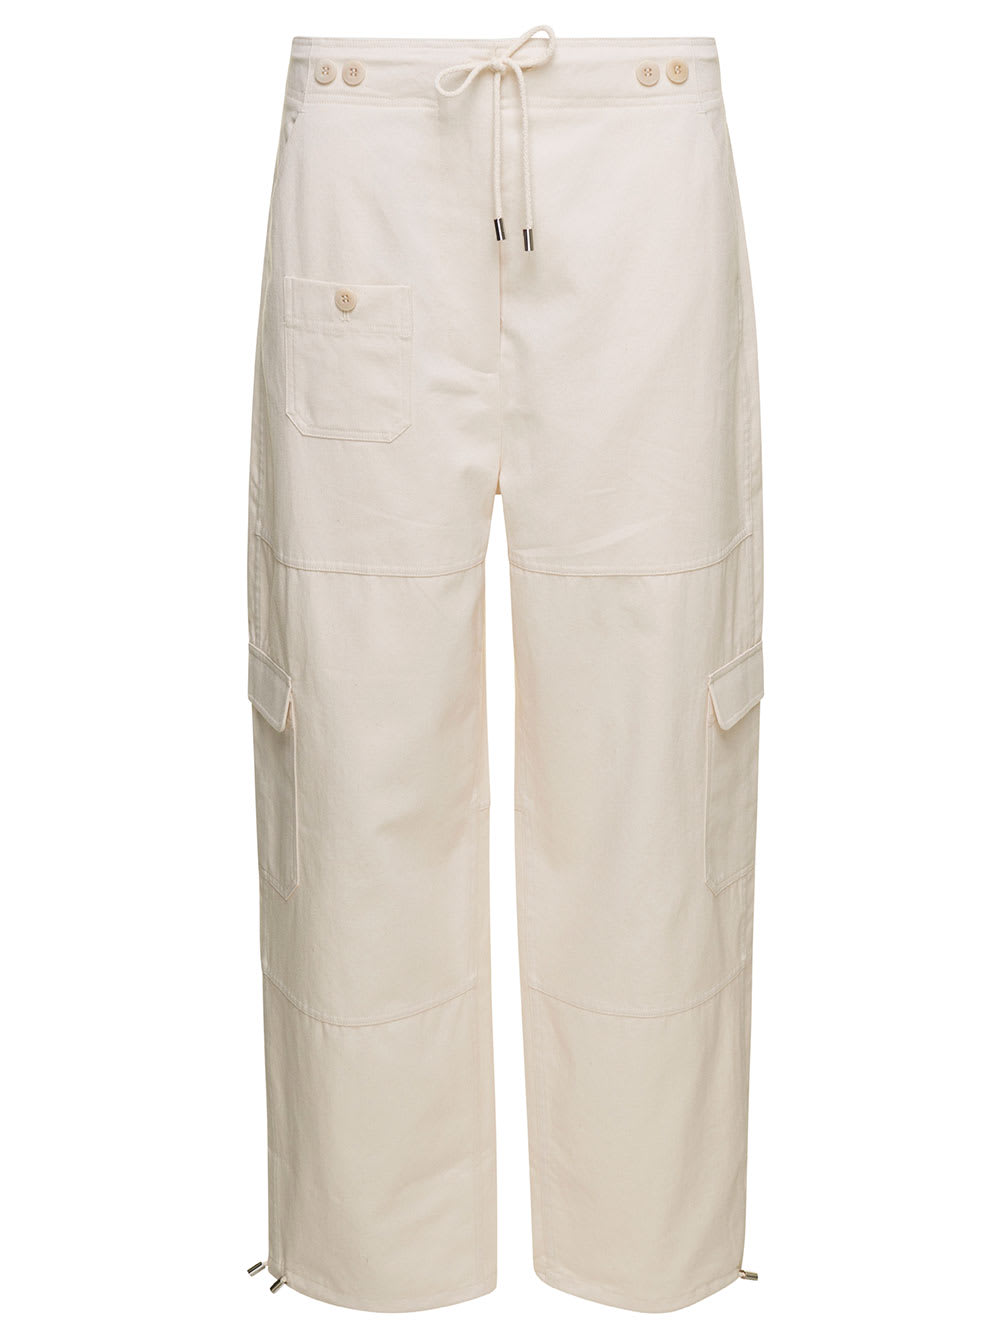 TOTÊME CARGO TRACK PNTS WITH CARGO POCKETS IN WHITE COTTON WOMAN